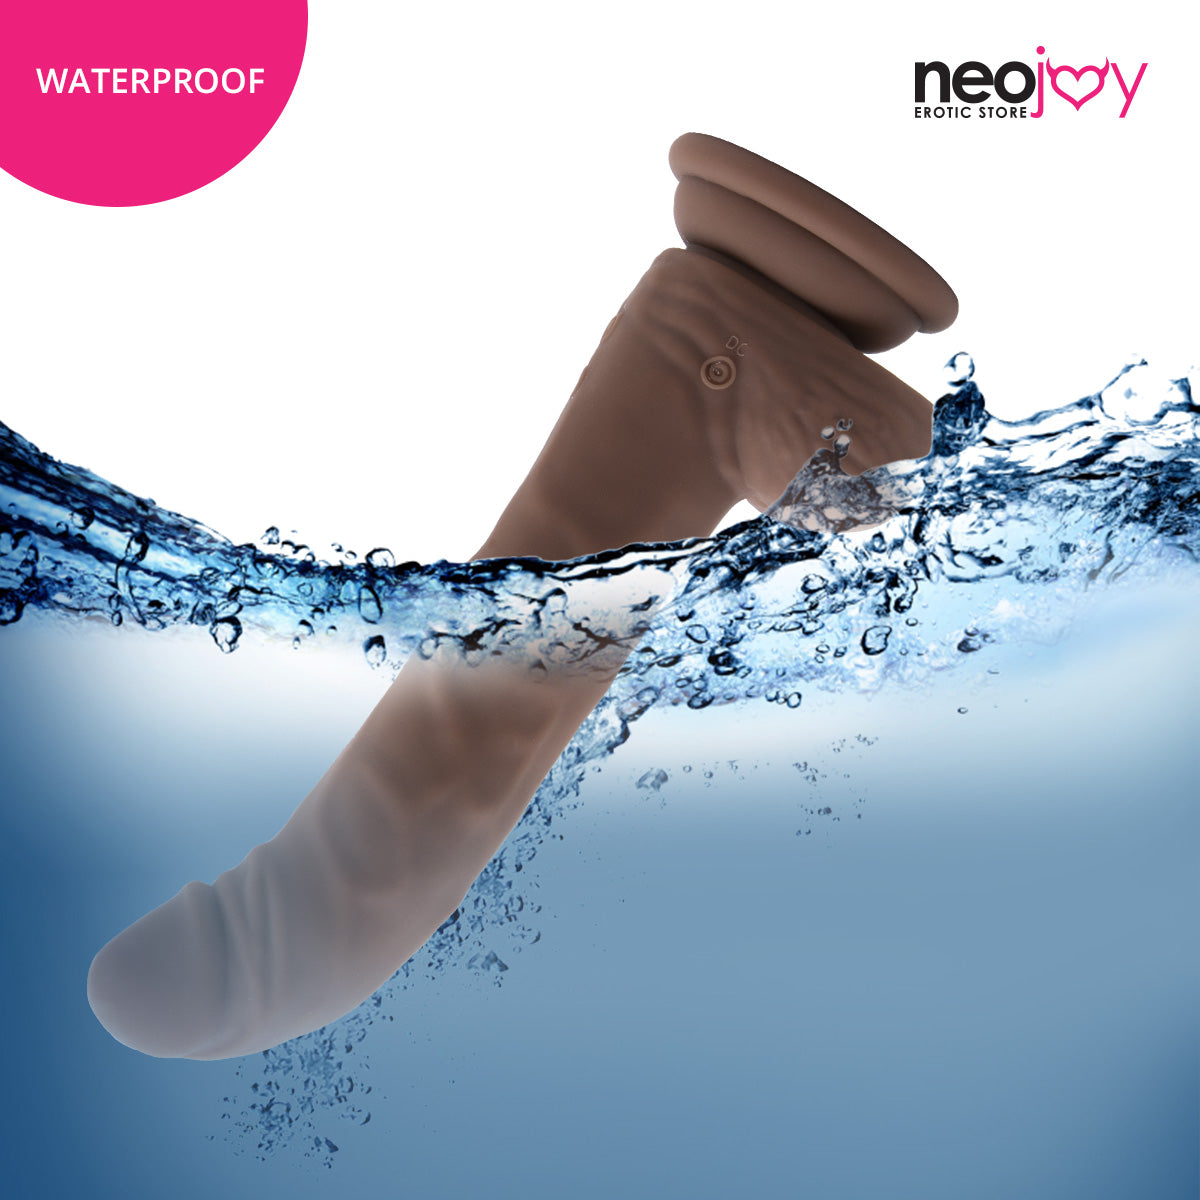 Neojoy - Biggy Vibrating Dildo With Strap-On Dong Harness - Brown - 23cm - 9.1 inch